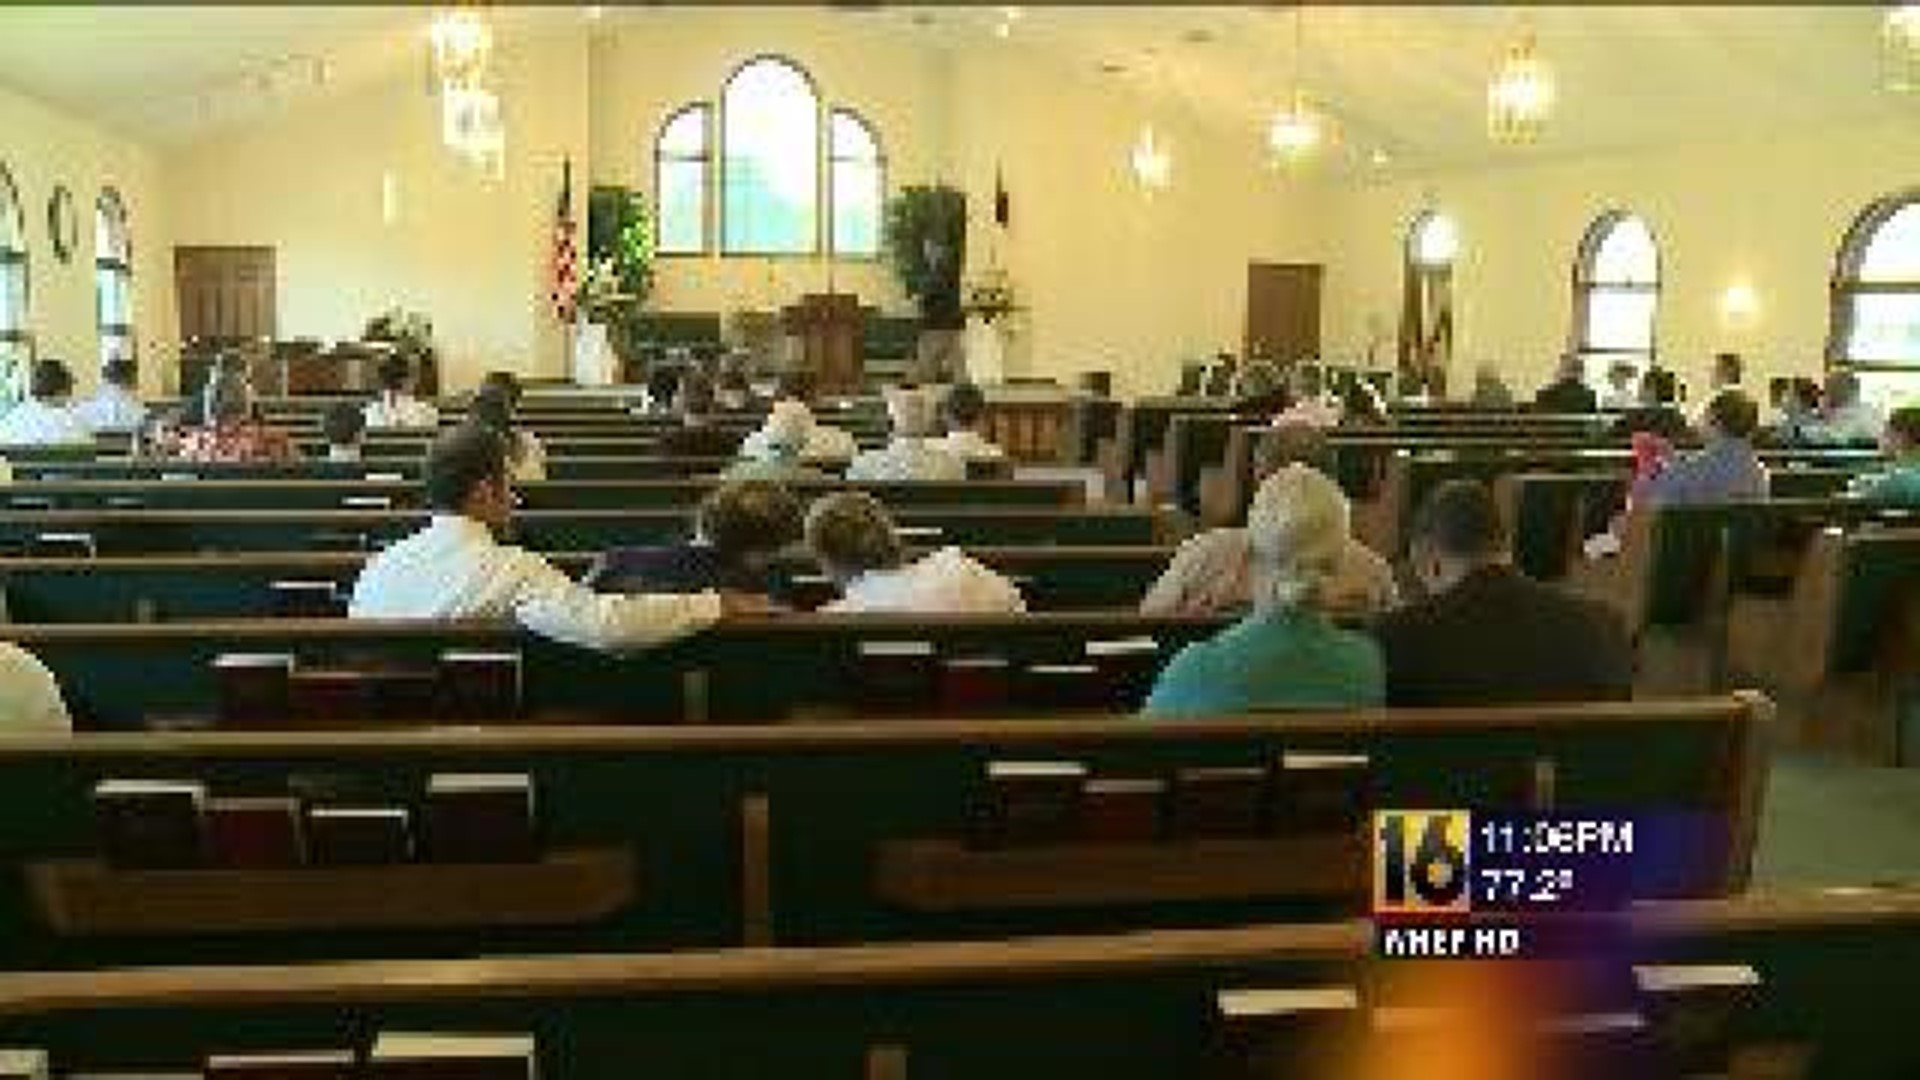 Church Comes Together To Worship After Vandalism